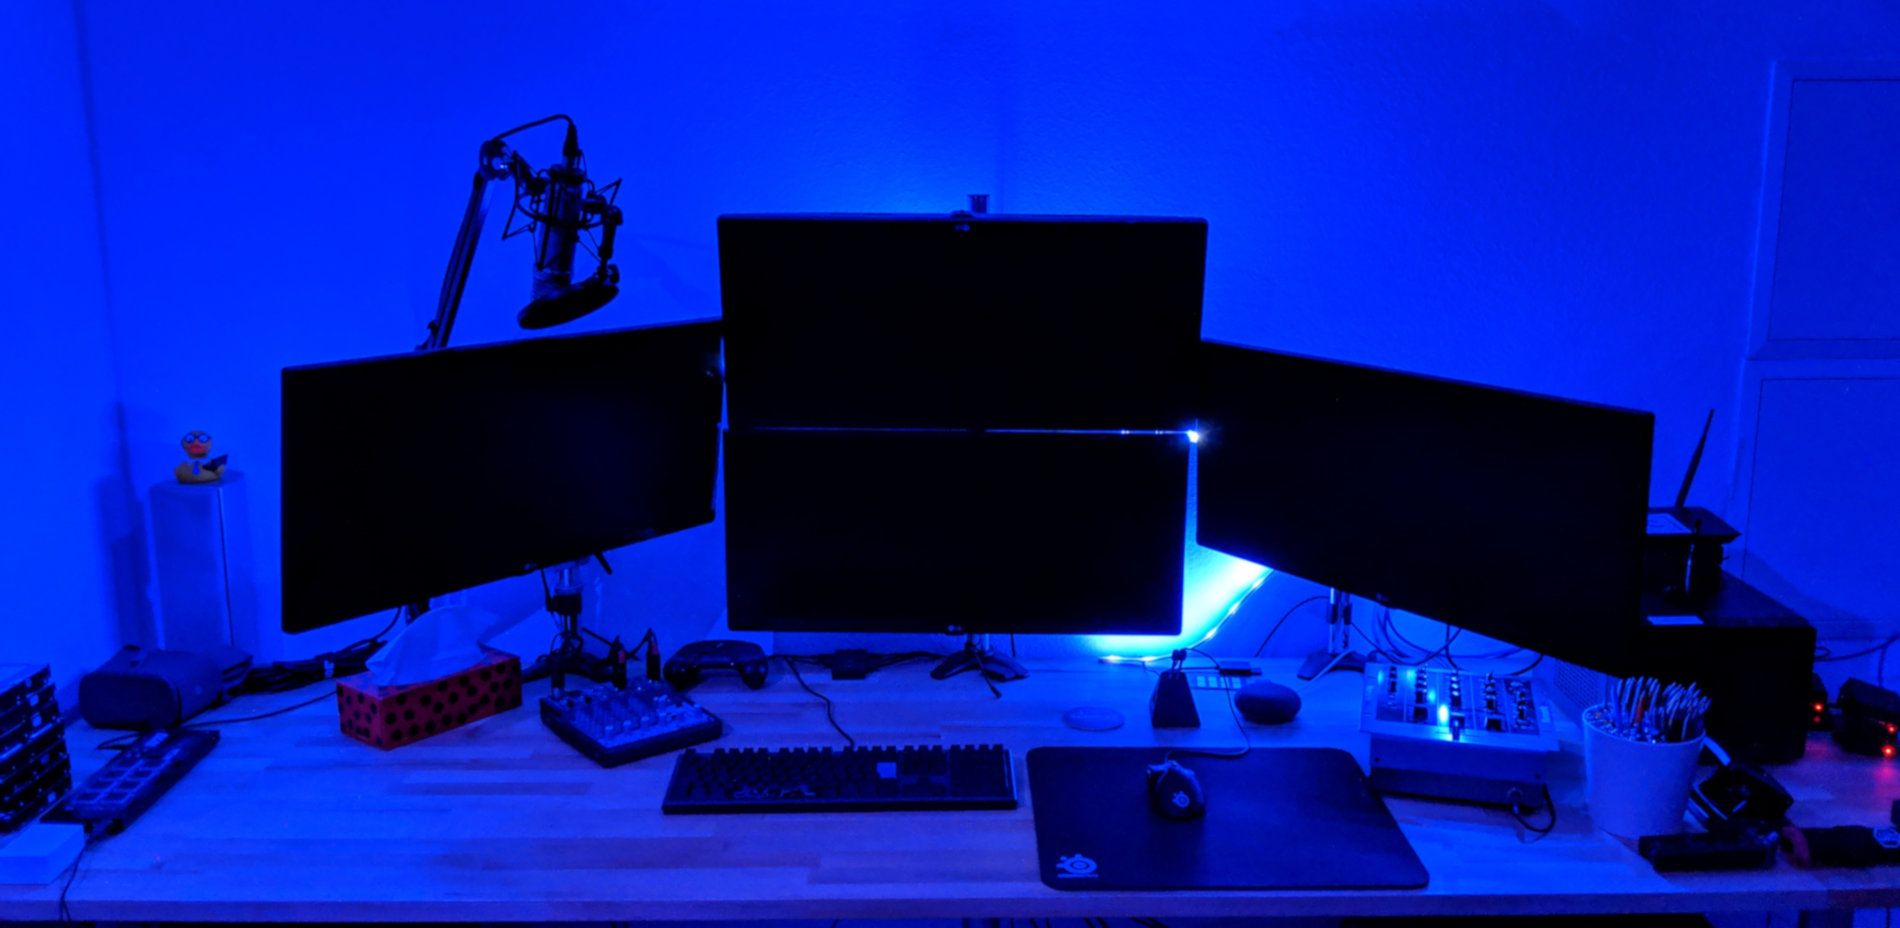 My New Home Setup - With colored background lighting even better!